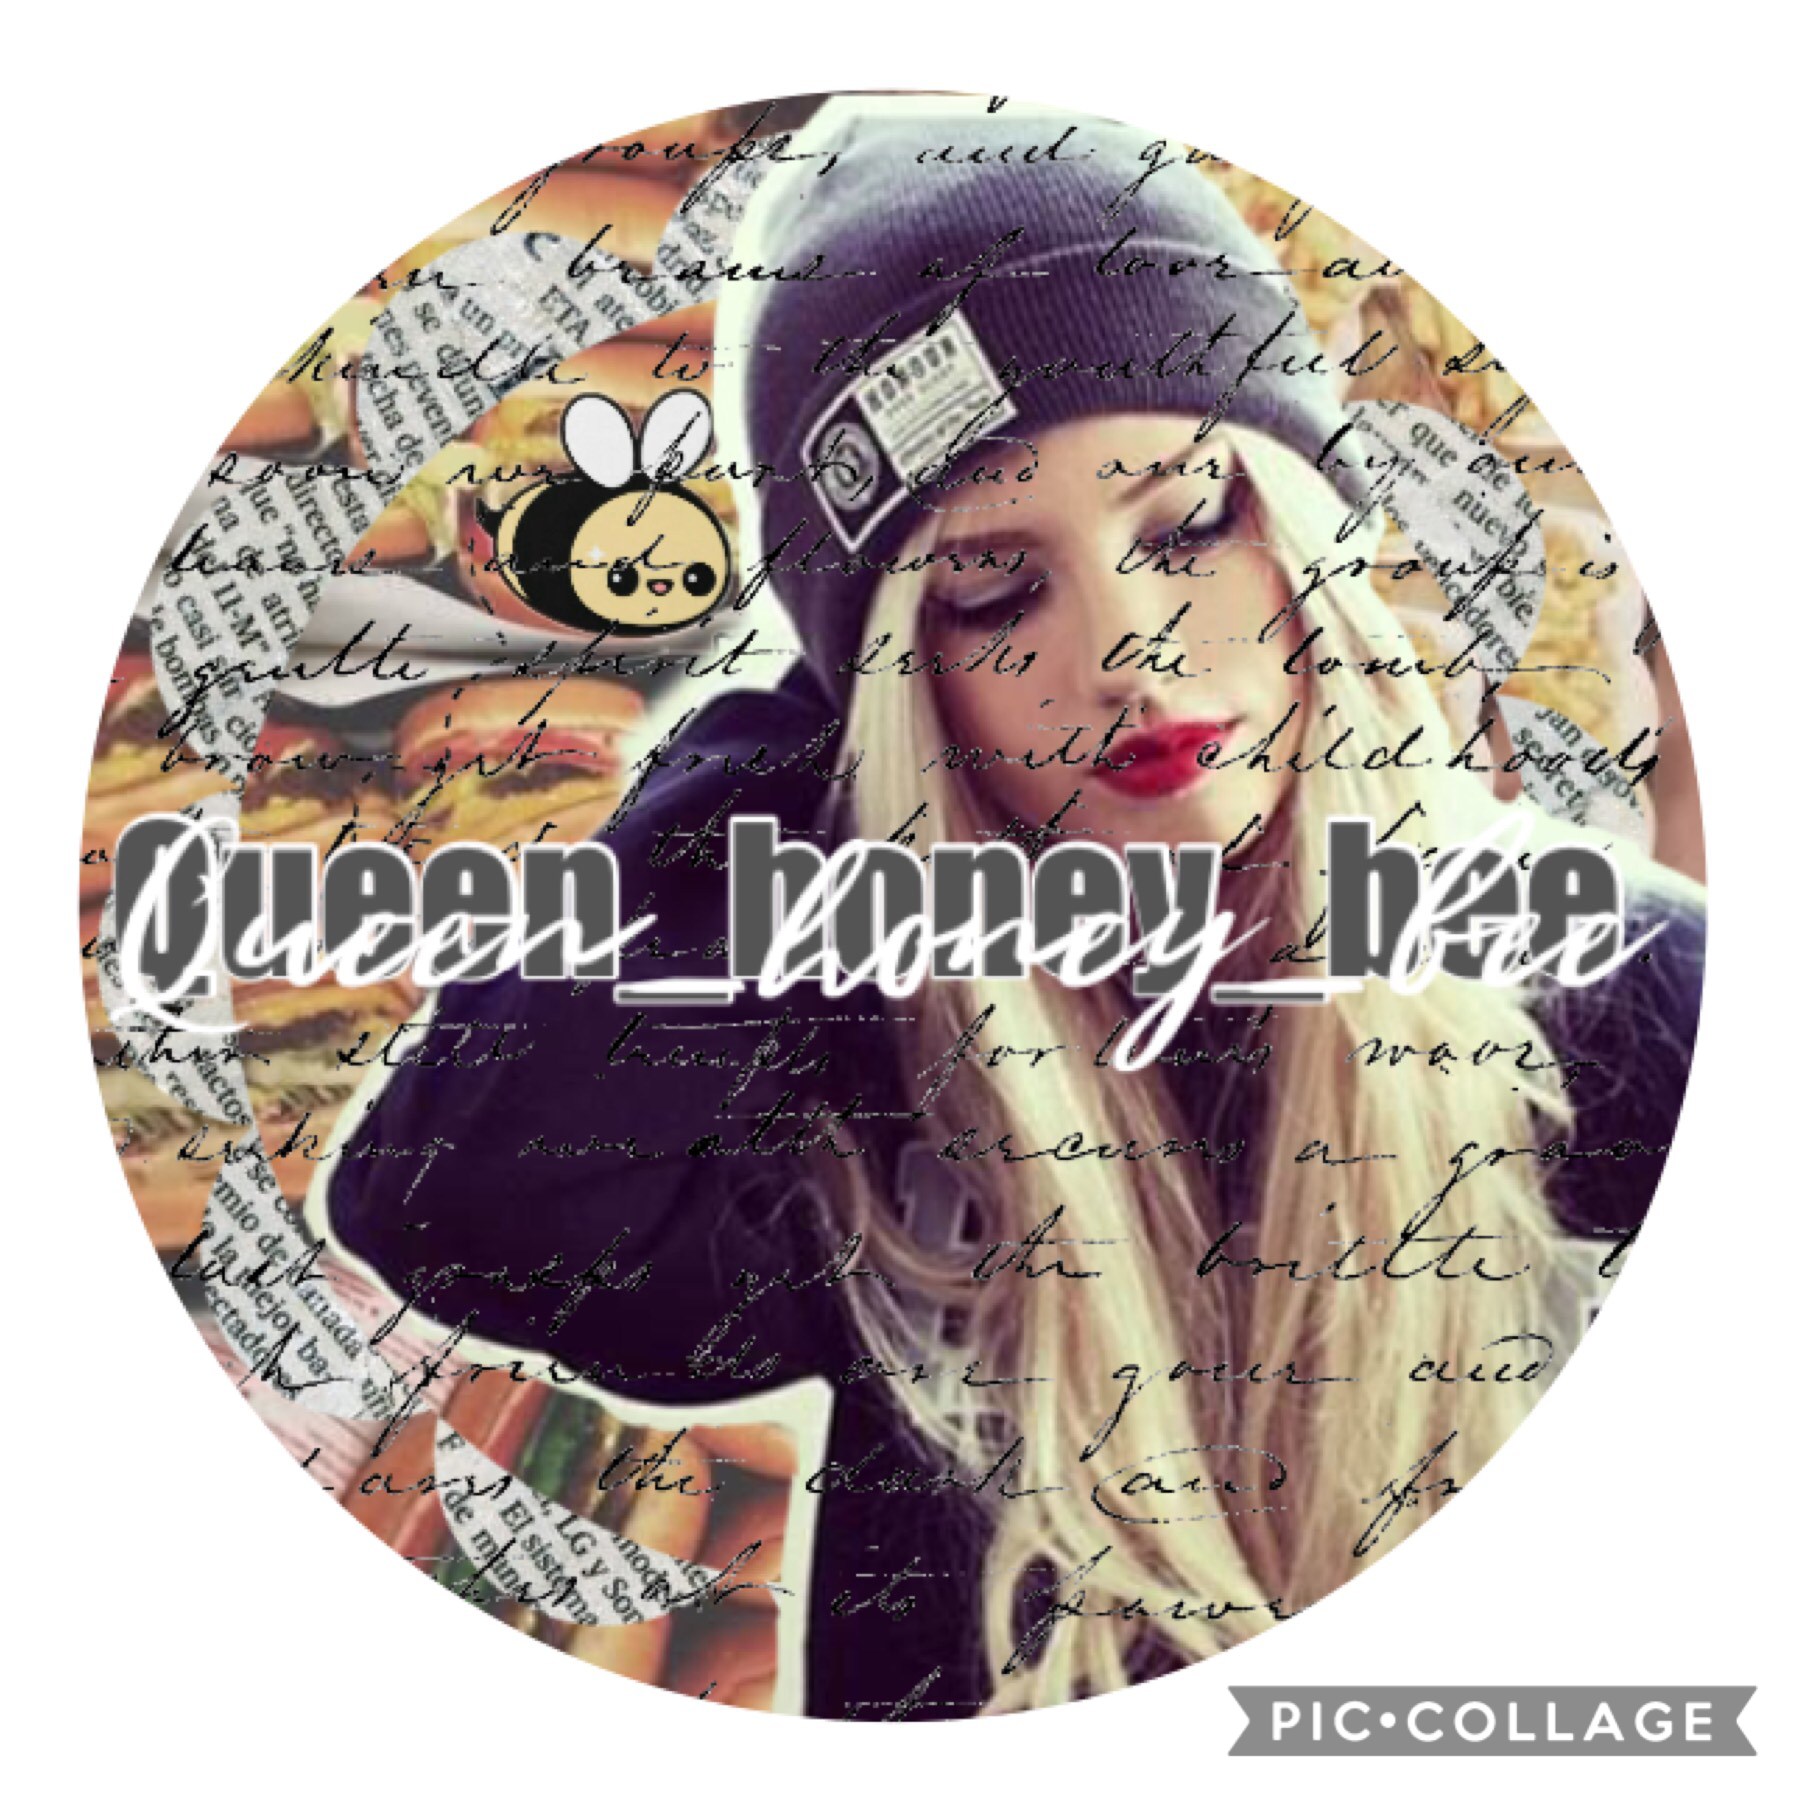 For Queen_honey_bee hope you like it!💖